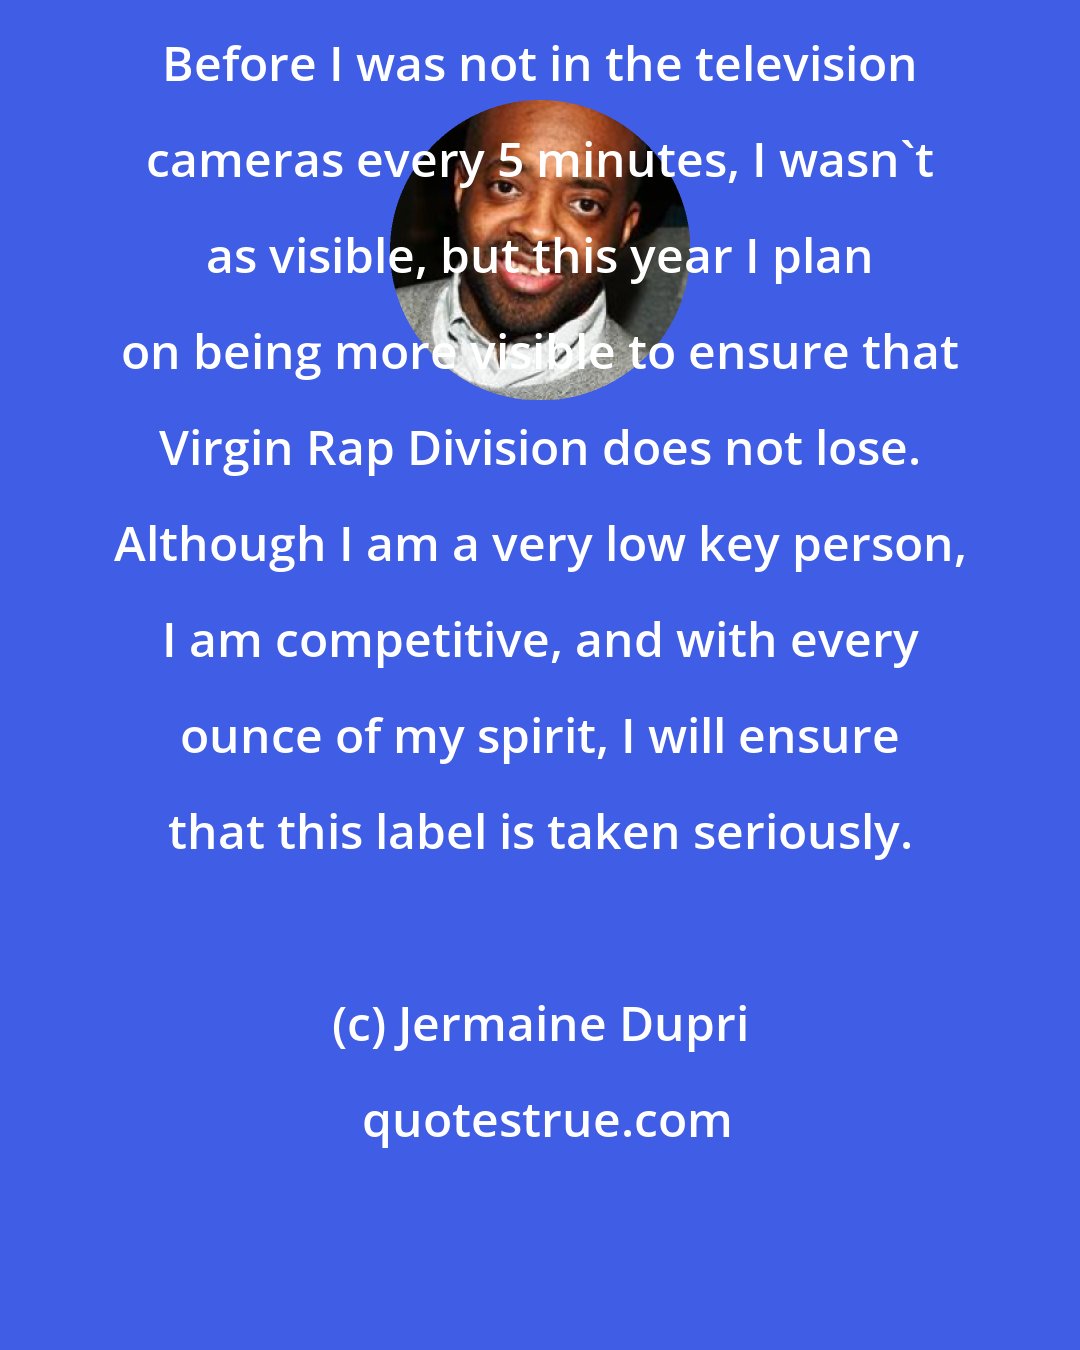 Jermaine Dupri: Before I was not in the television cameras every 5 minutes, I wasn't as visible, but this year I plan on being more visible to ensure that Virgin Rap Division does not lose. Although I am a very low key person, I am competitive, and with every ounce of my spirit, I will ensure that this label is taken seriously.